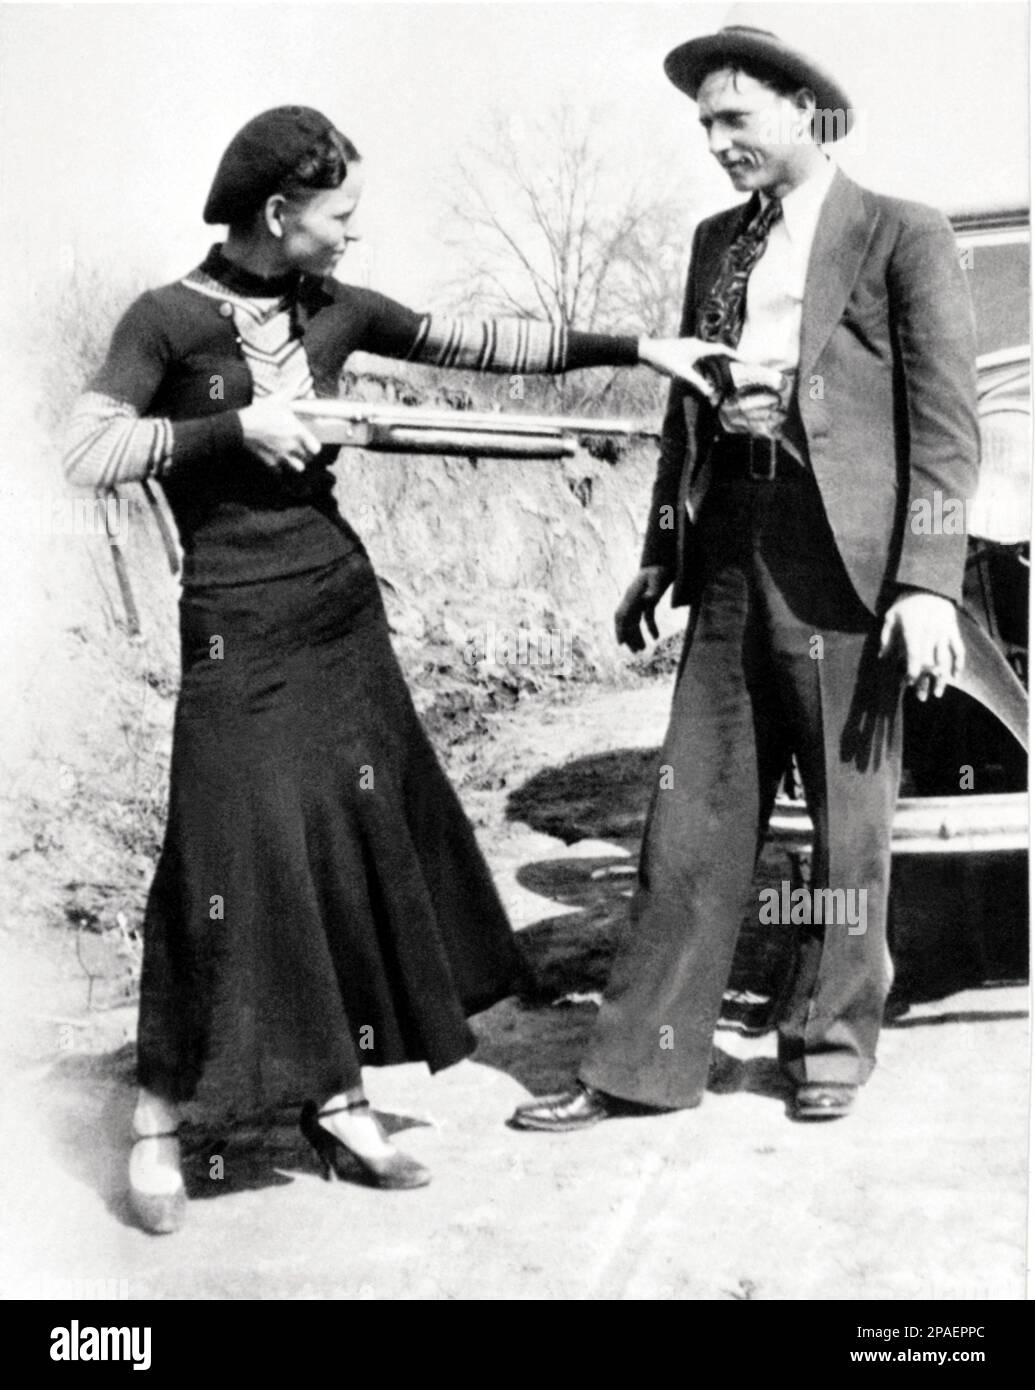 1932  , 23 may , Arkansas , USA : The two most celebrated gangstern BONNIE PARKER ( 1910 - 1934 ) and CLYDE BARROW  ( 1909 - 1934 ) . Were notorious outlaws, robbers and criminals who travelled the Central United States during the Great Depression. Their exploits were known nationwide. They captured the attention of the American press and its readership during what is sometimes referred to as the 'public enemy era' between 1931 and 1935. Although this couple and their gang were notorious for their bank robberies, Clyde Barrow preferred to rob small stores or gas stations.- portrait - ritratto Stock Photo